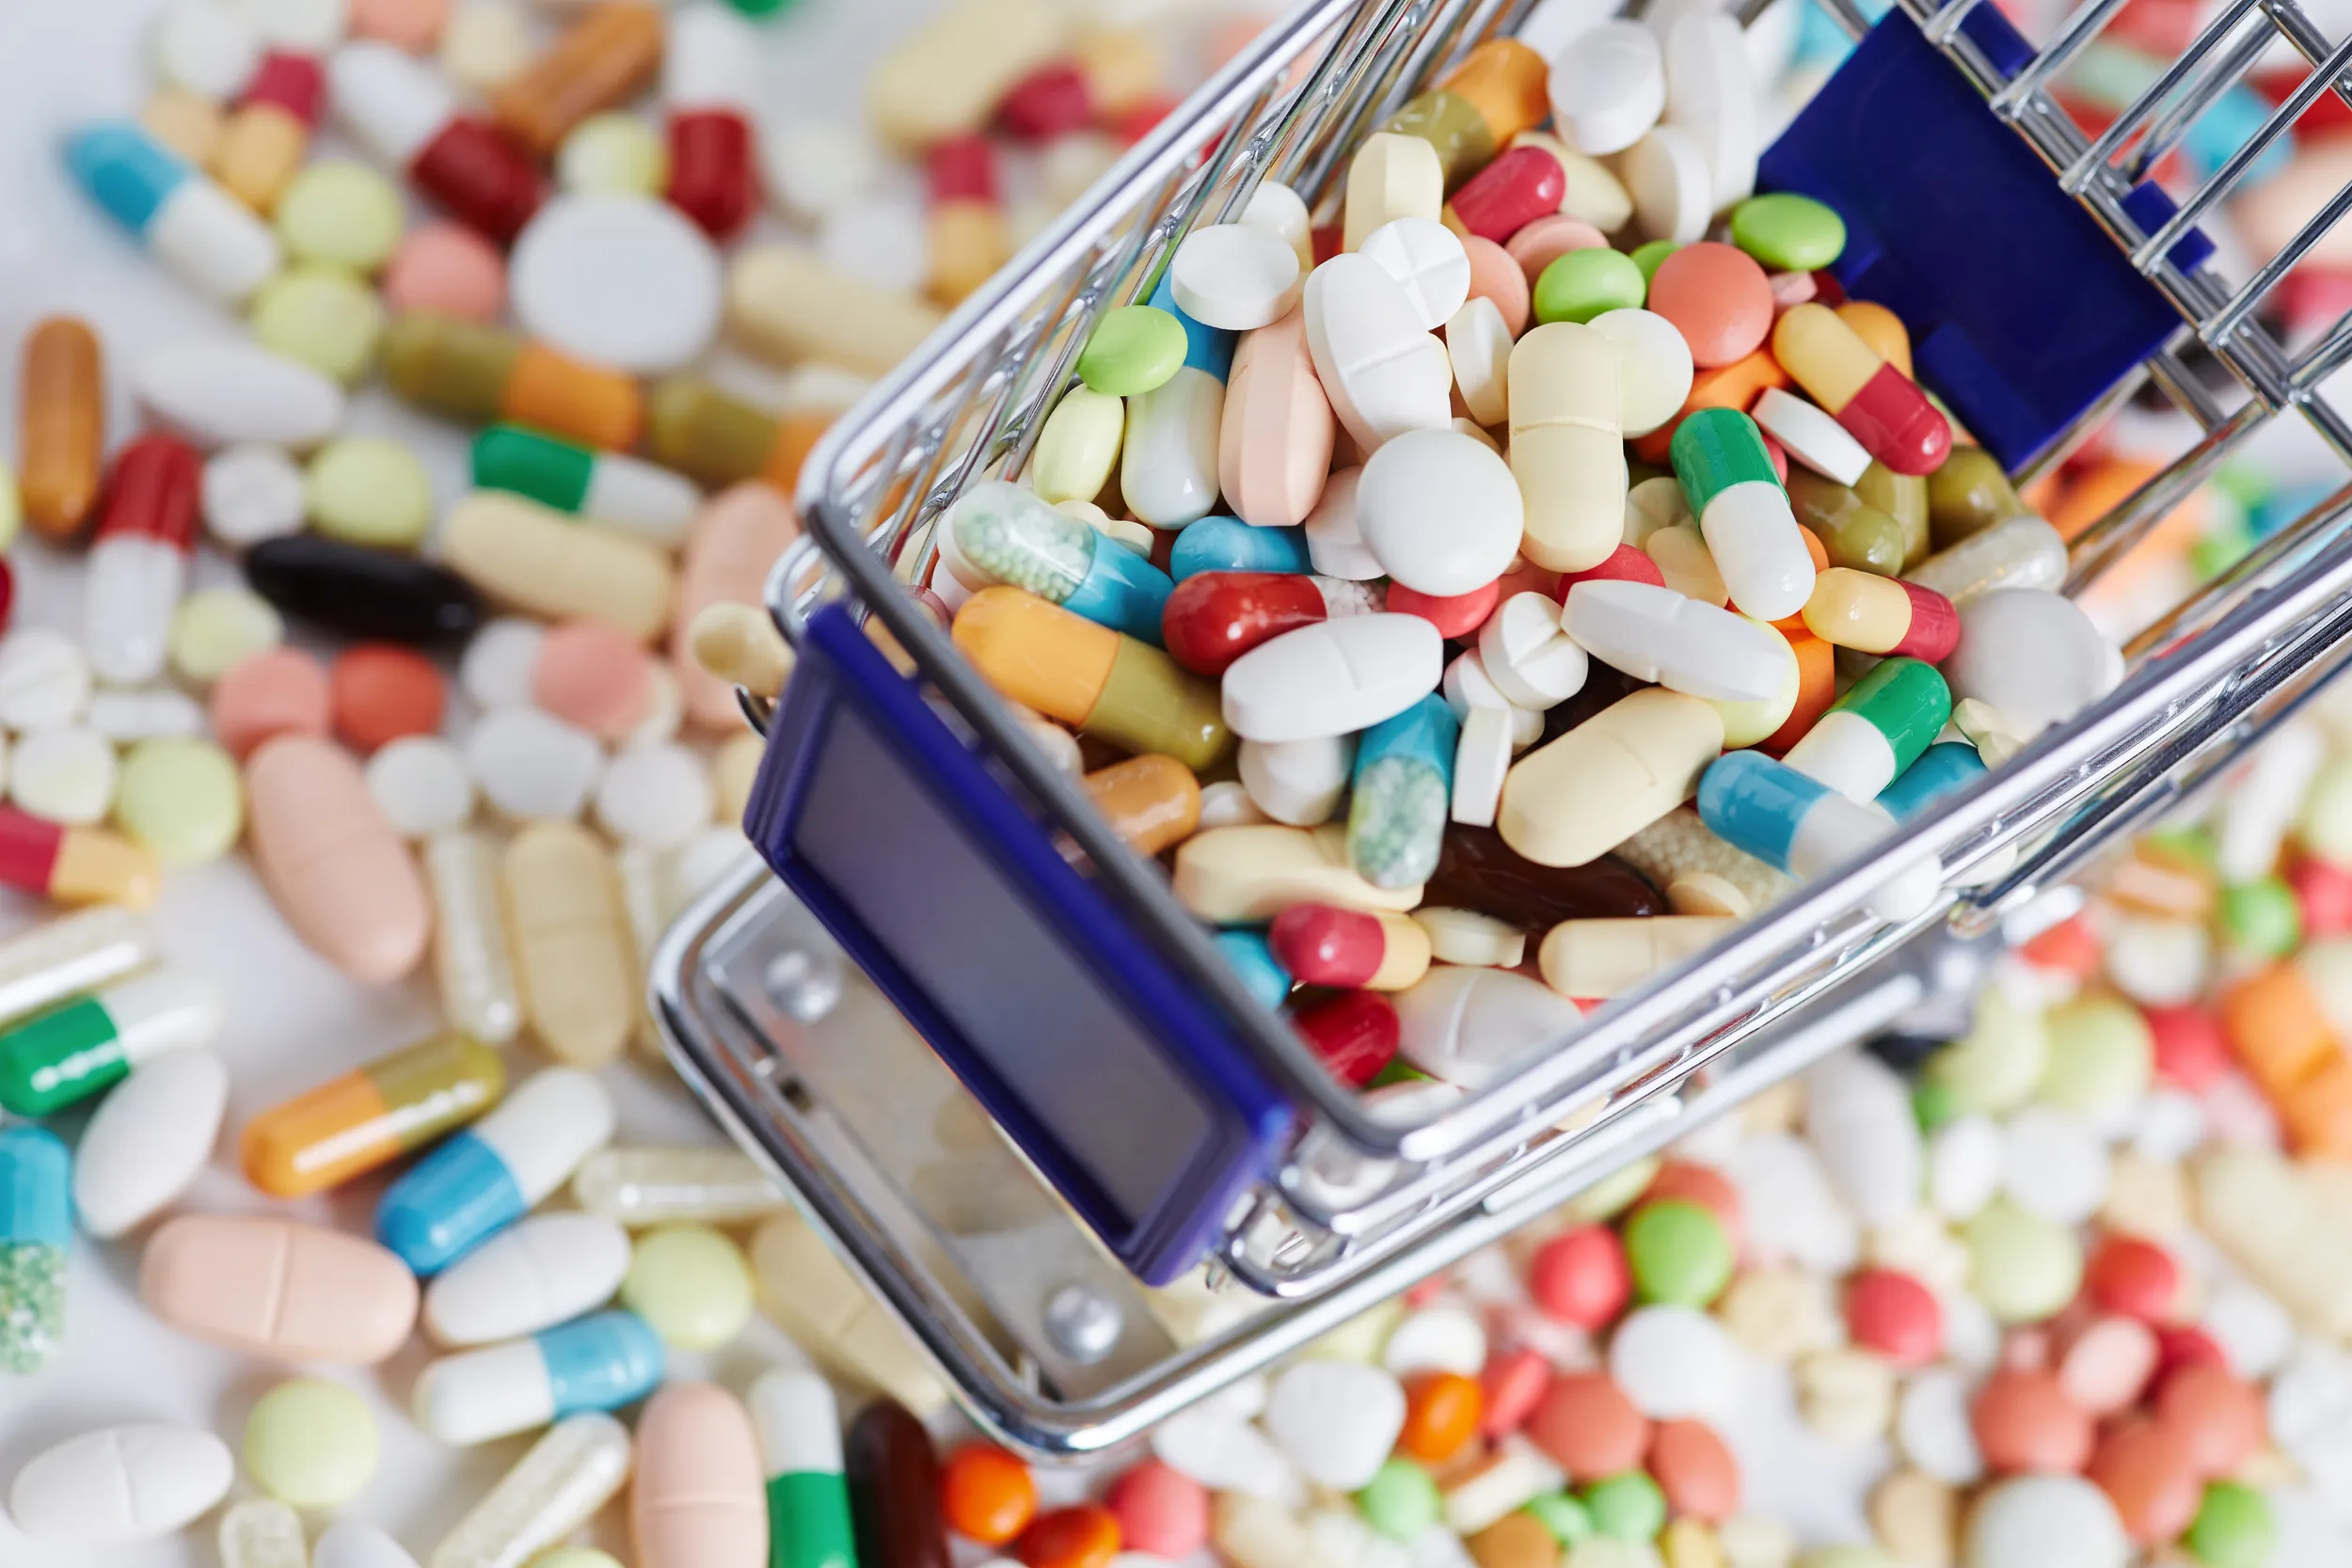 A shopping cart overflowing with various cororfull pills and capsules